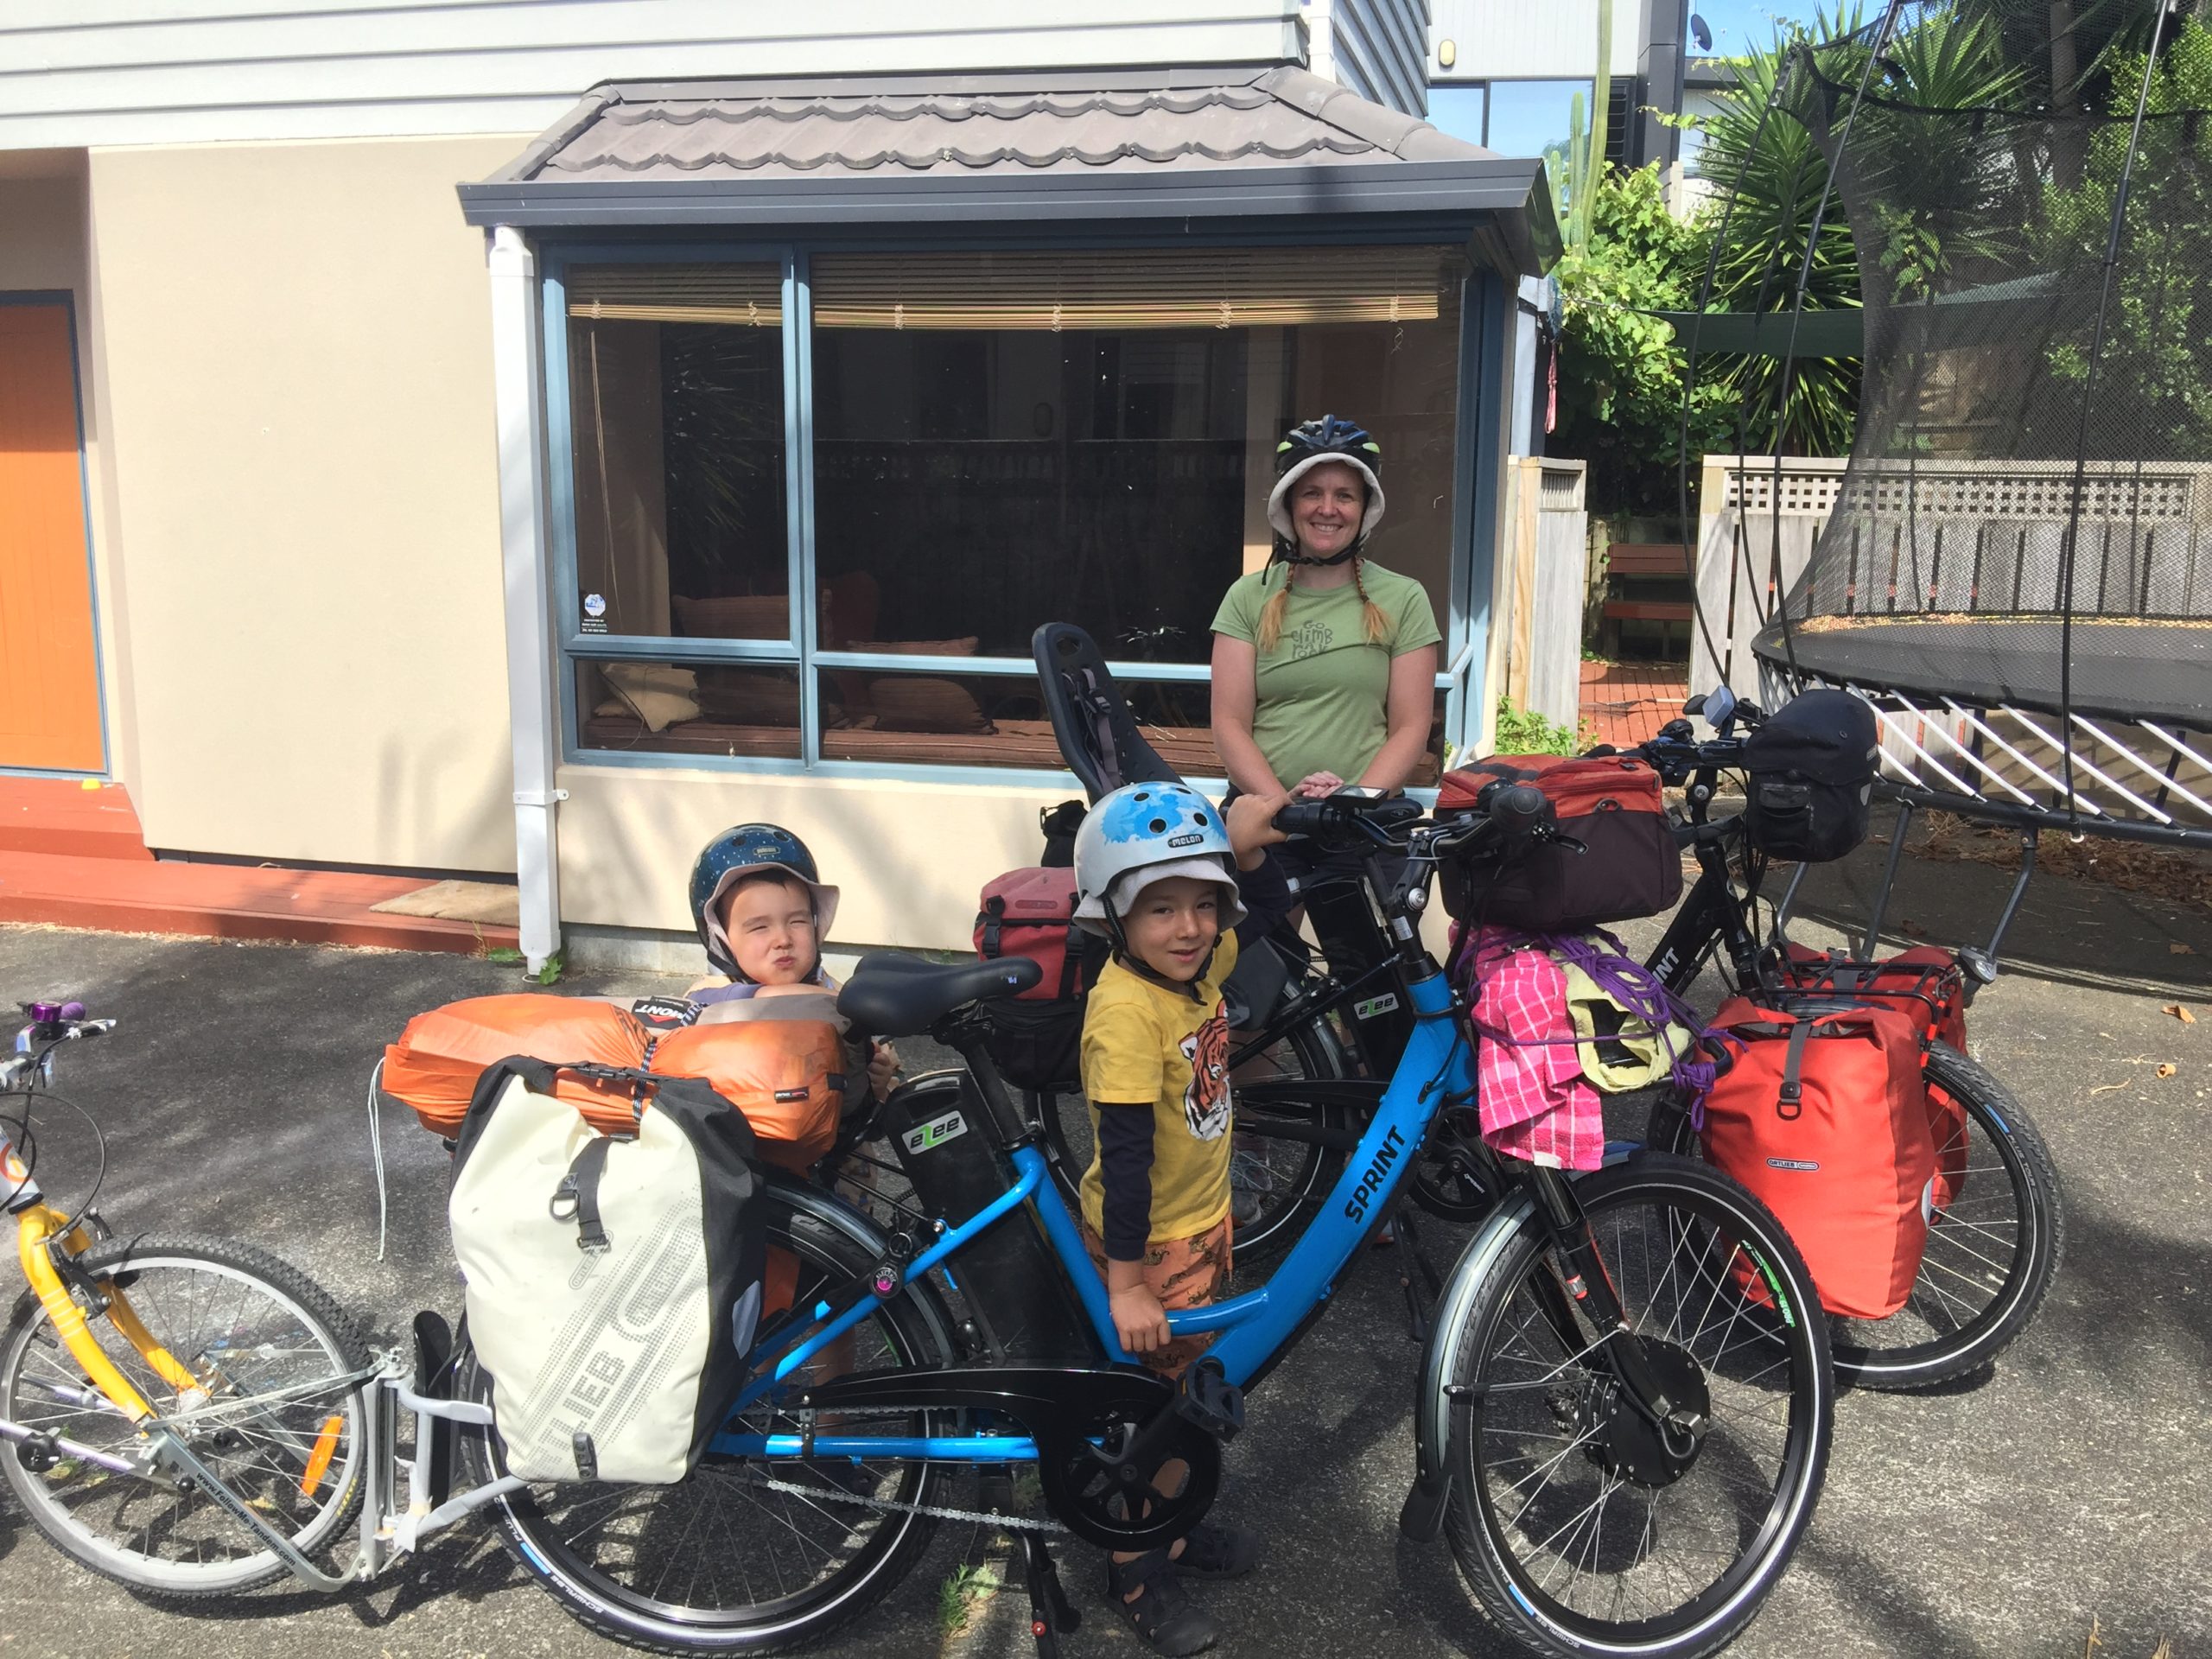 Family going on a camping holiday by e-bike